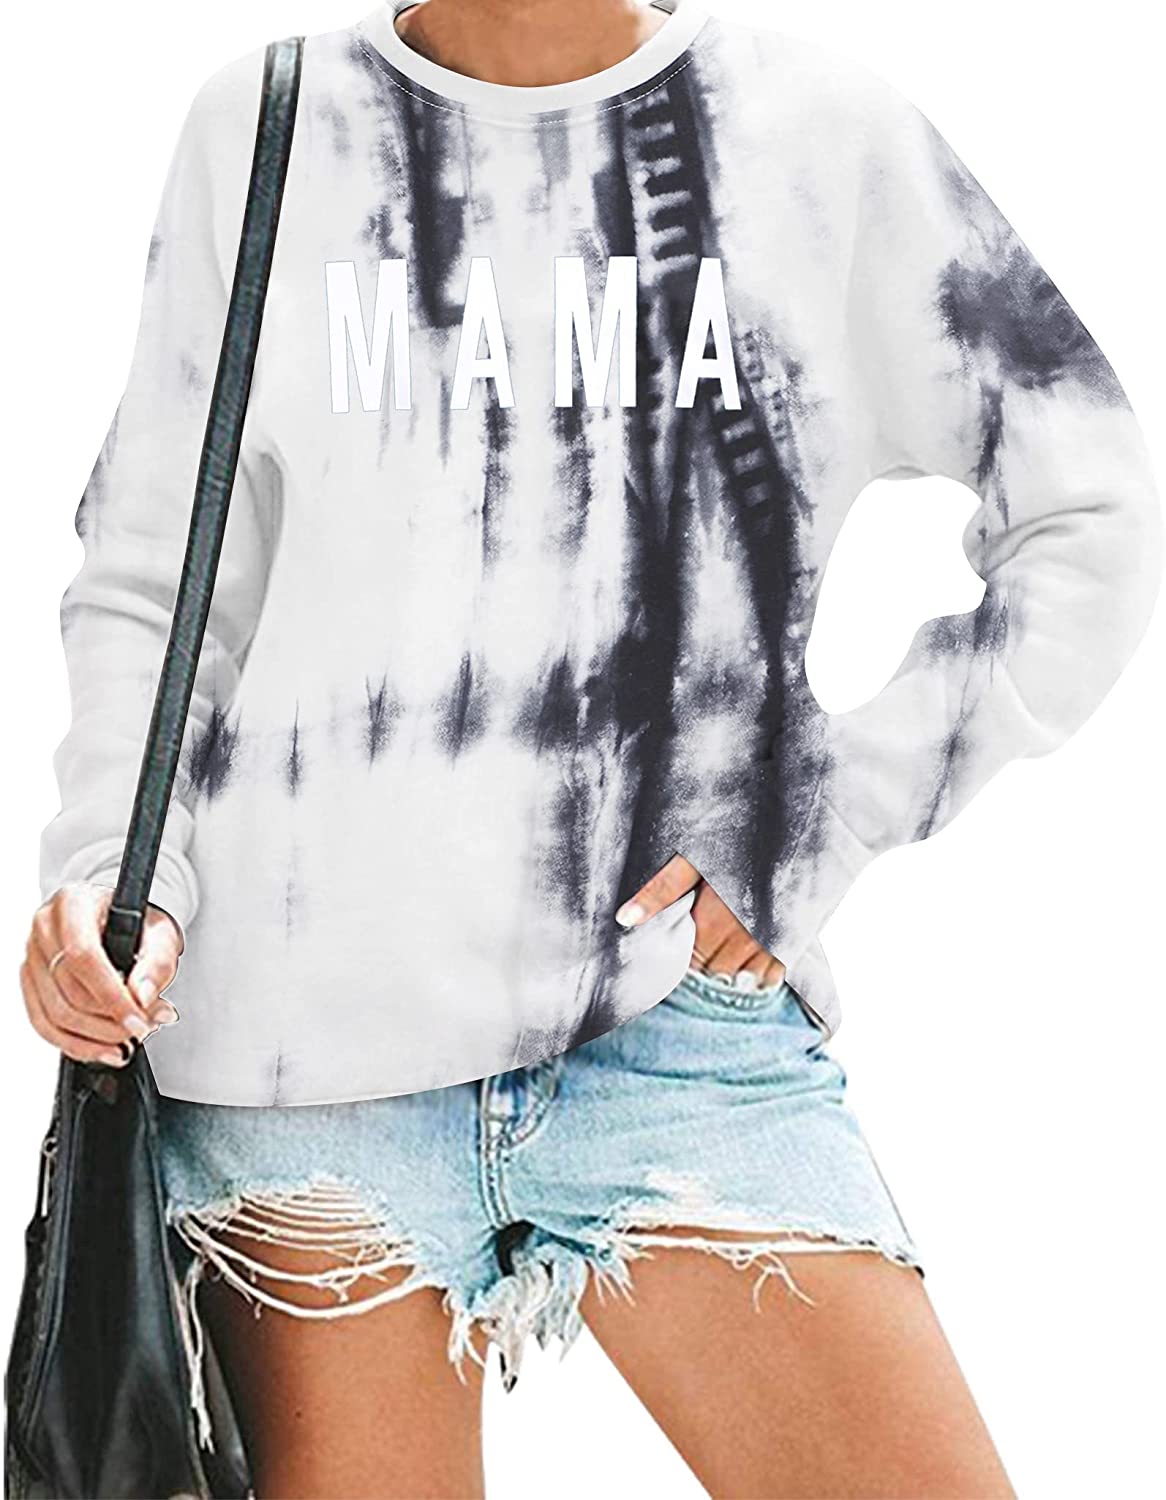 Tie Dye Shirt Women Mom Life Tshirts Mama Letter Printed Clothes Casual Short Sleeve Tees Tops